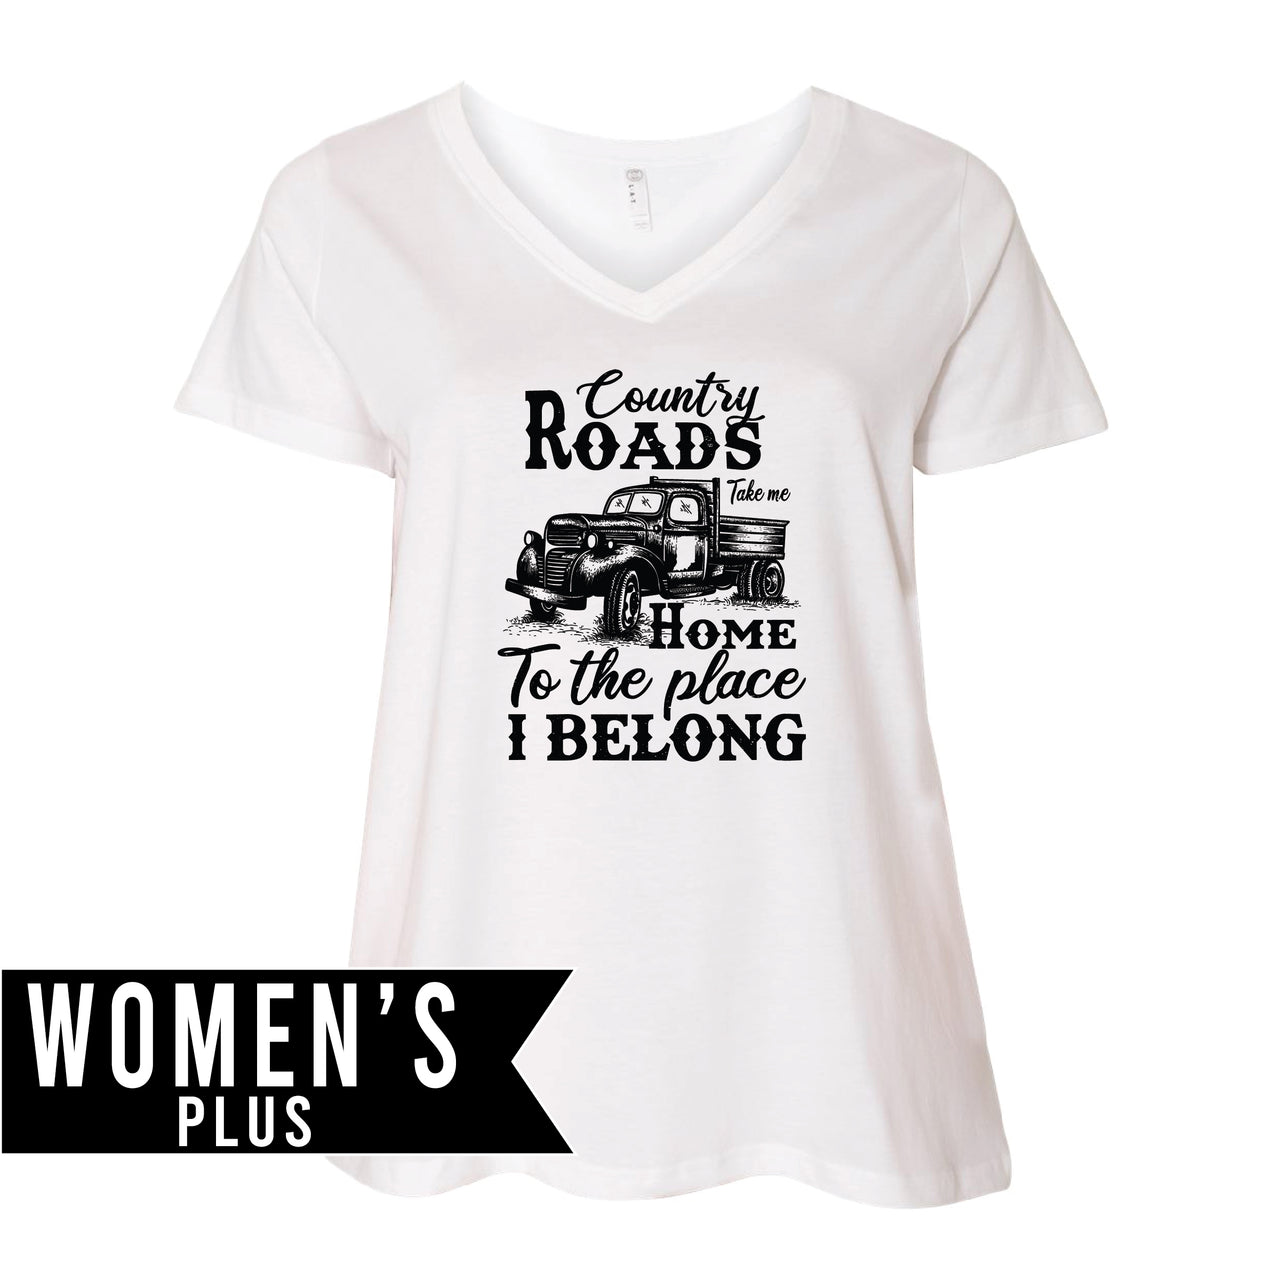 Plus Size Women's Premium Jersey V-Neck Tee - Indiana Country Roads